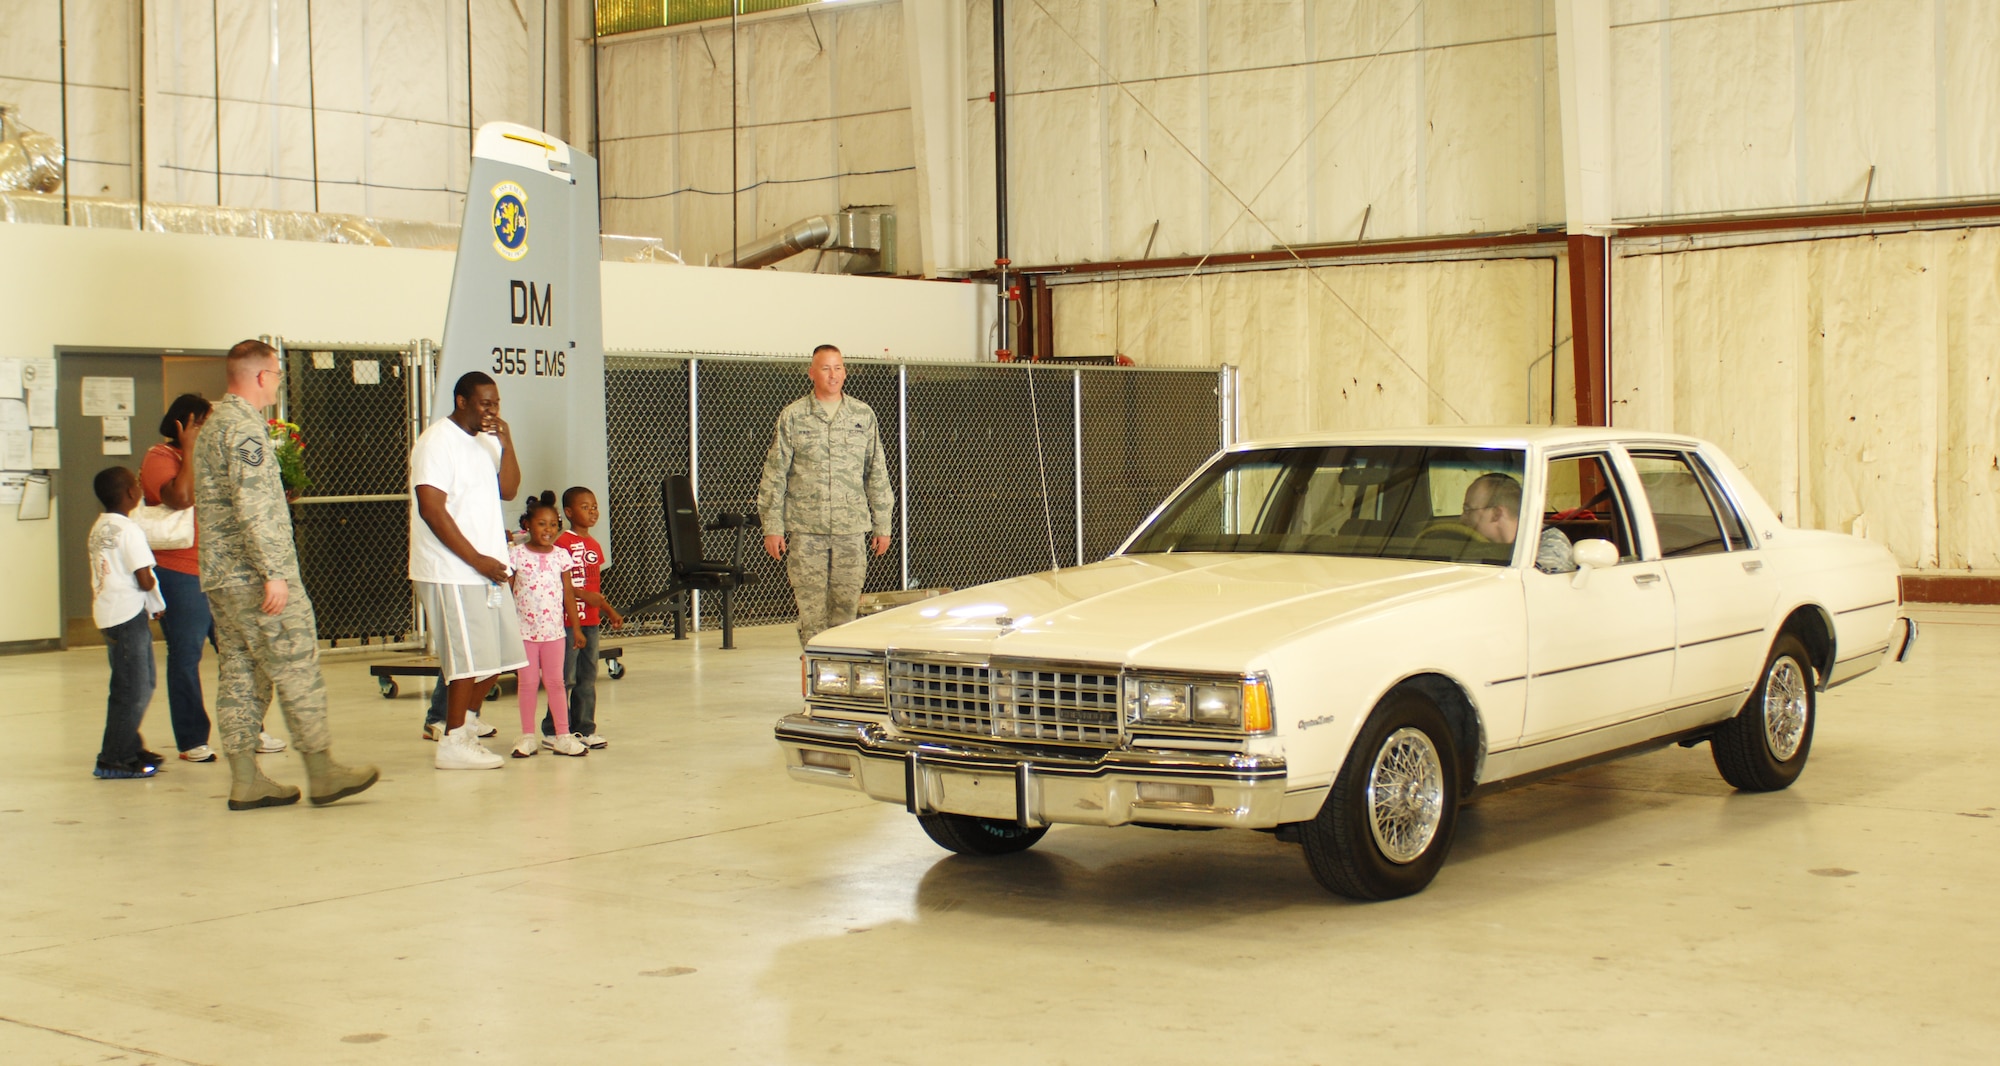 U.S. Air Force Tech. Sgt. Adrian Mapps, 355th Equipment Maintenance Squadron, and his family look on in surprise as the new-and-improved version of their 1984 Chevy Caprice Classic is driven in to the hangar on Davis-Monthan Air Force Base, Ariz., March 5. Members of the 355th EMS pooled their time, money and talents to repair the vehicle for the Mapps family. (U.S. Air Force photo by Airman 1st Class Saphfire Cook/Released)